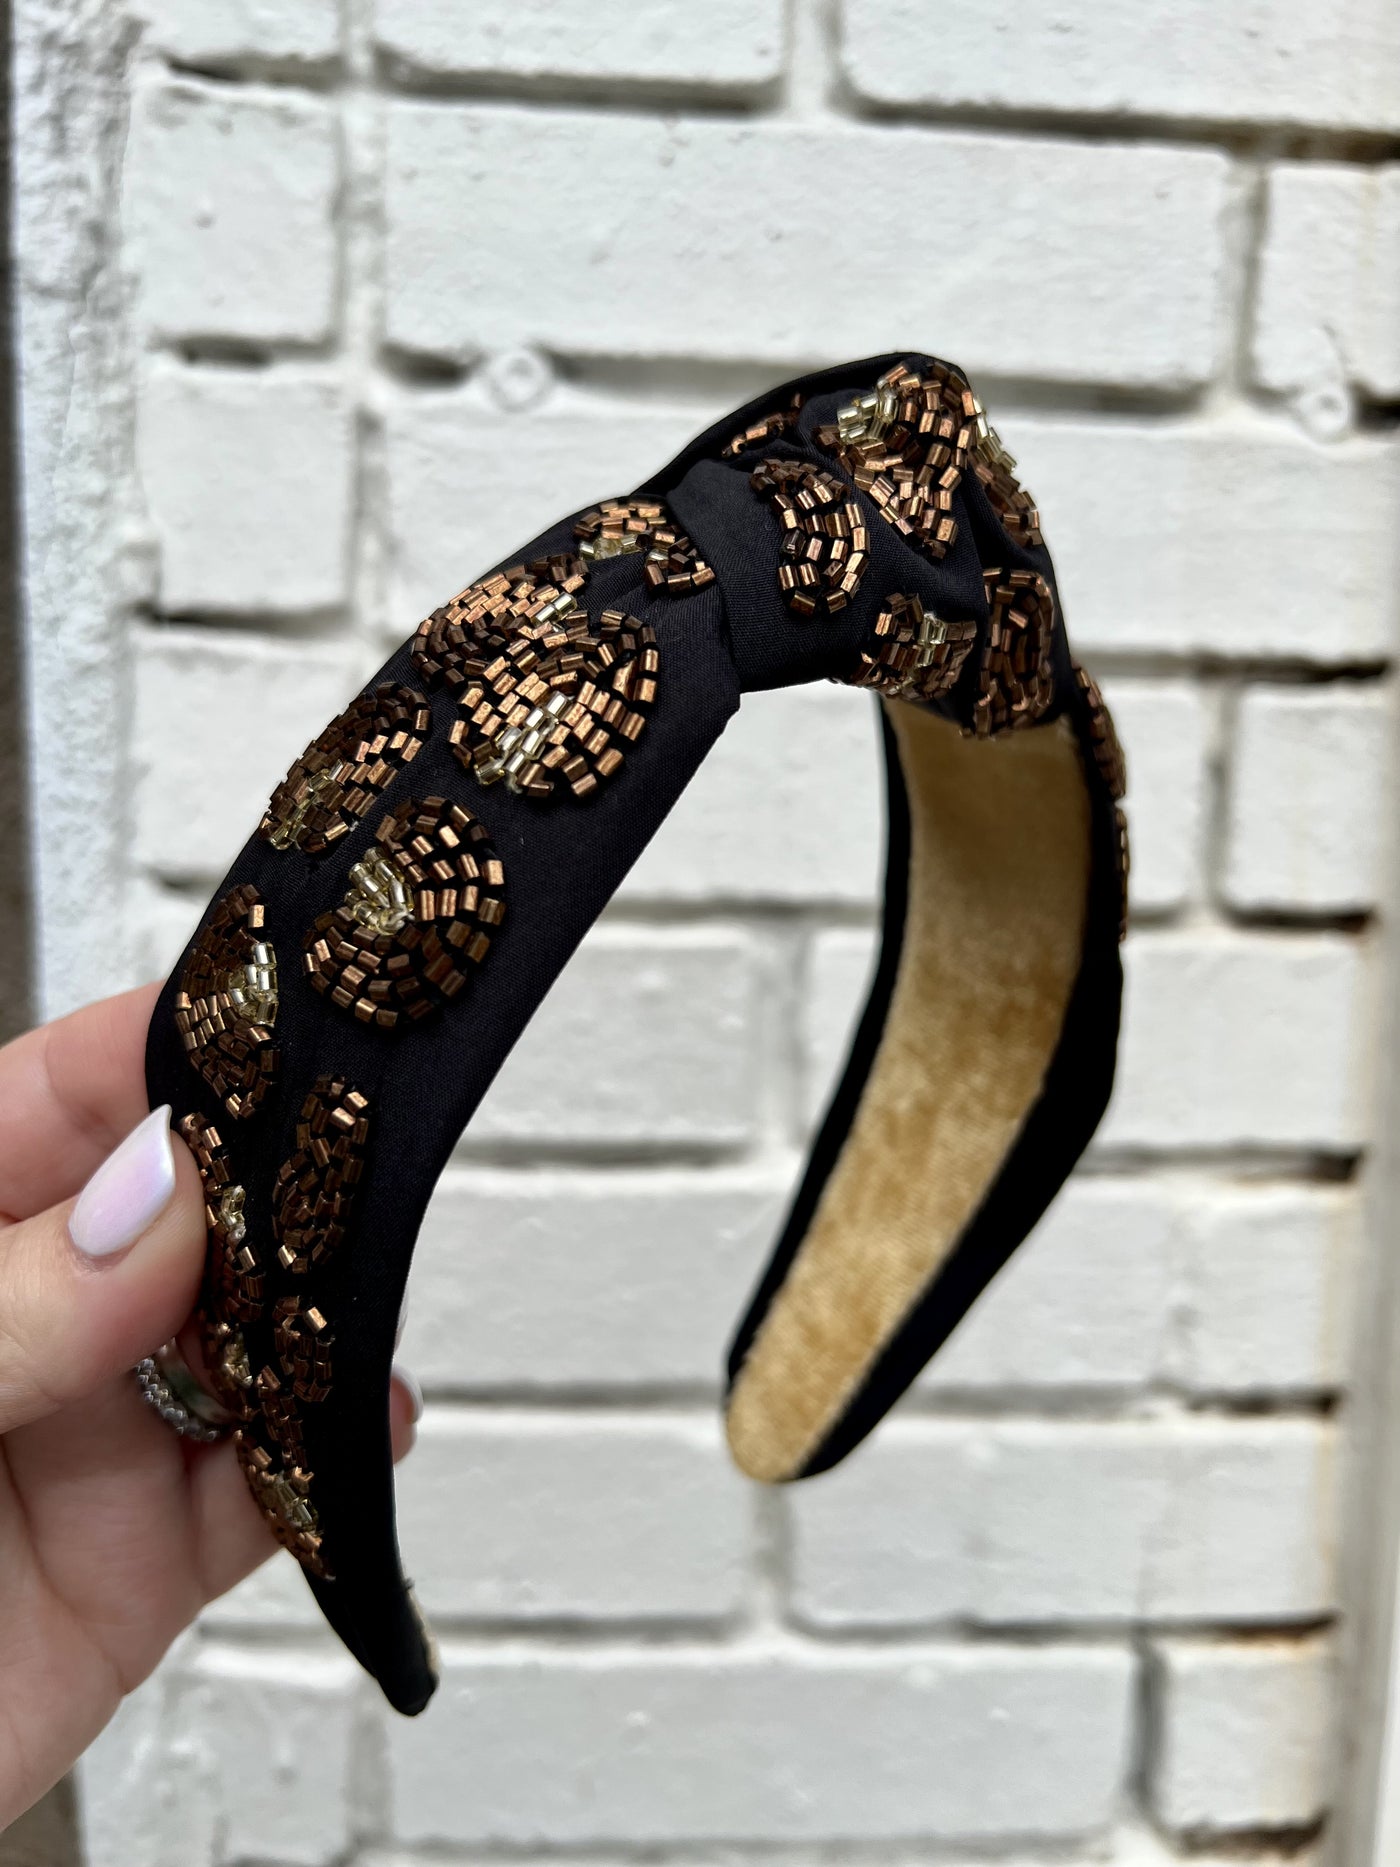 Knot Headband - Black with Gold Beads